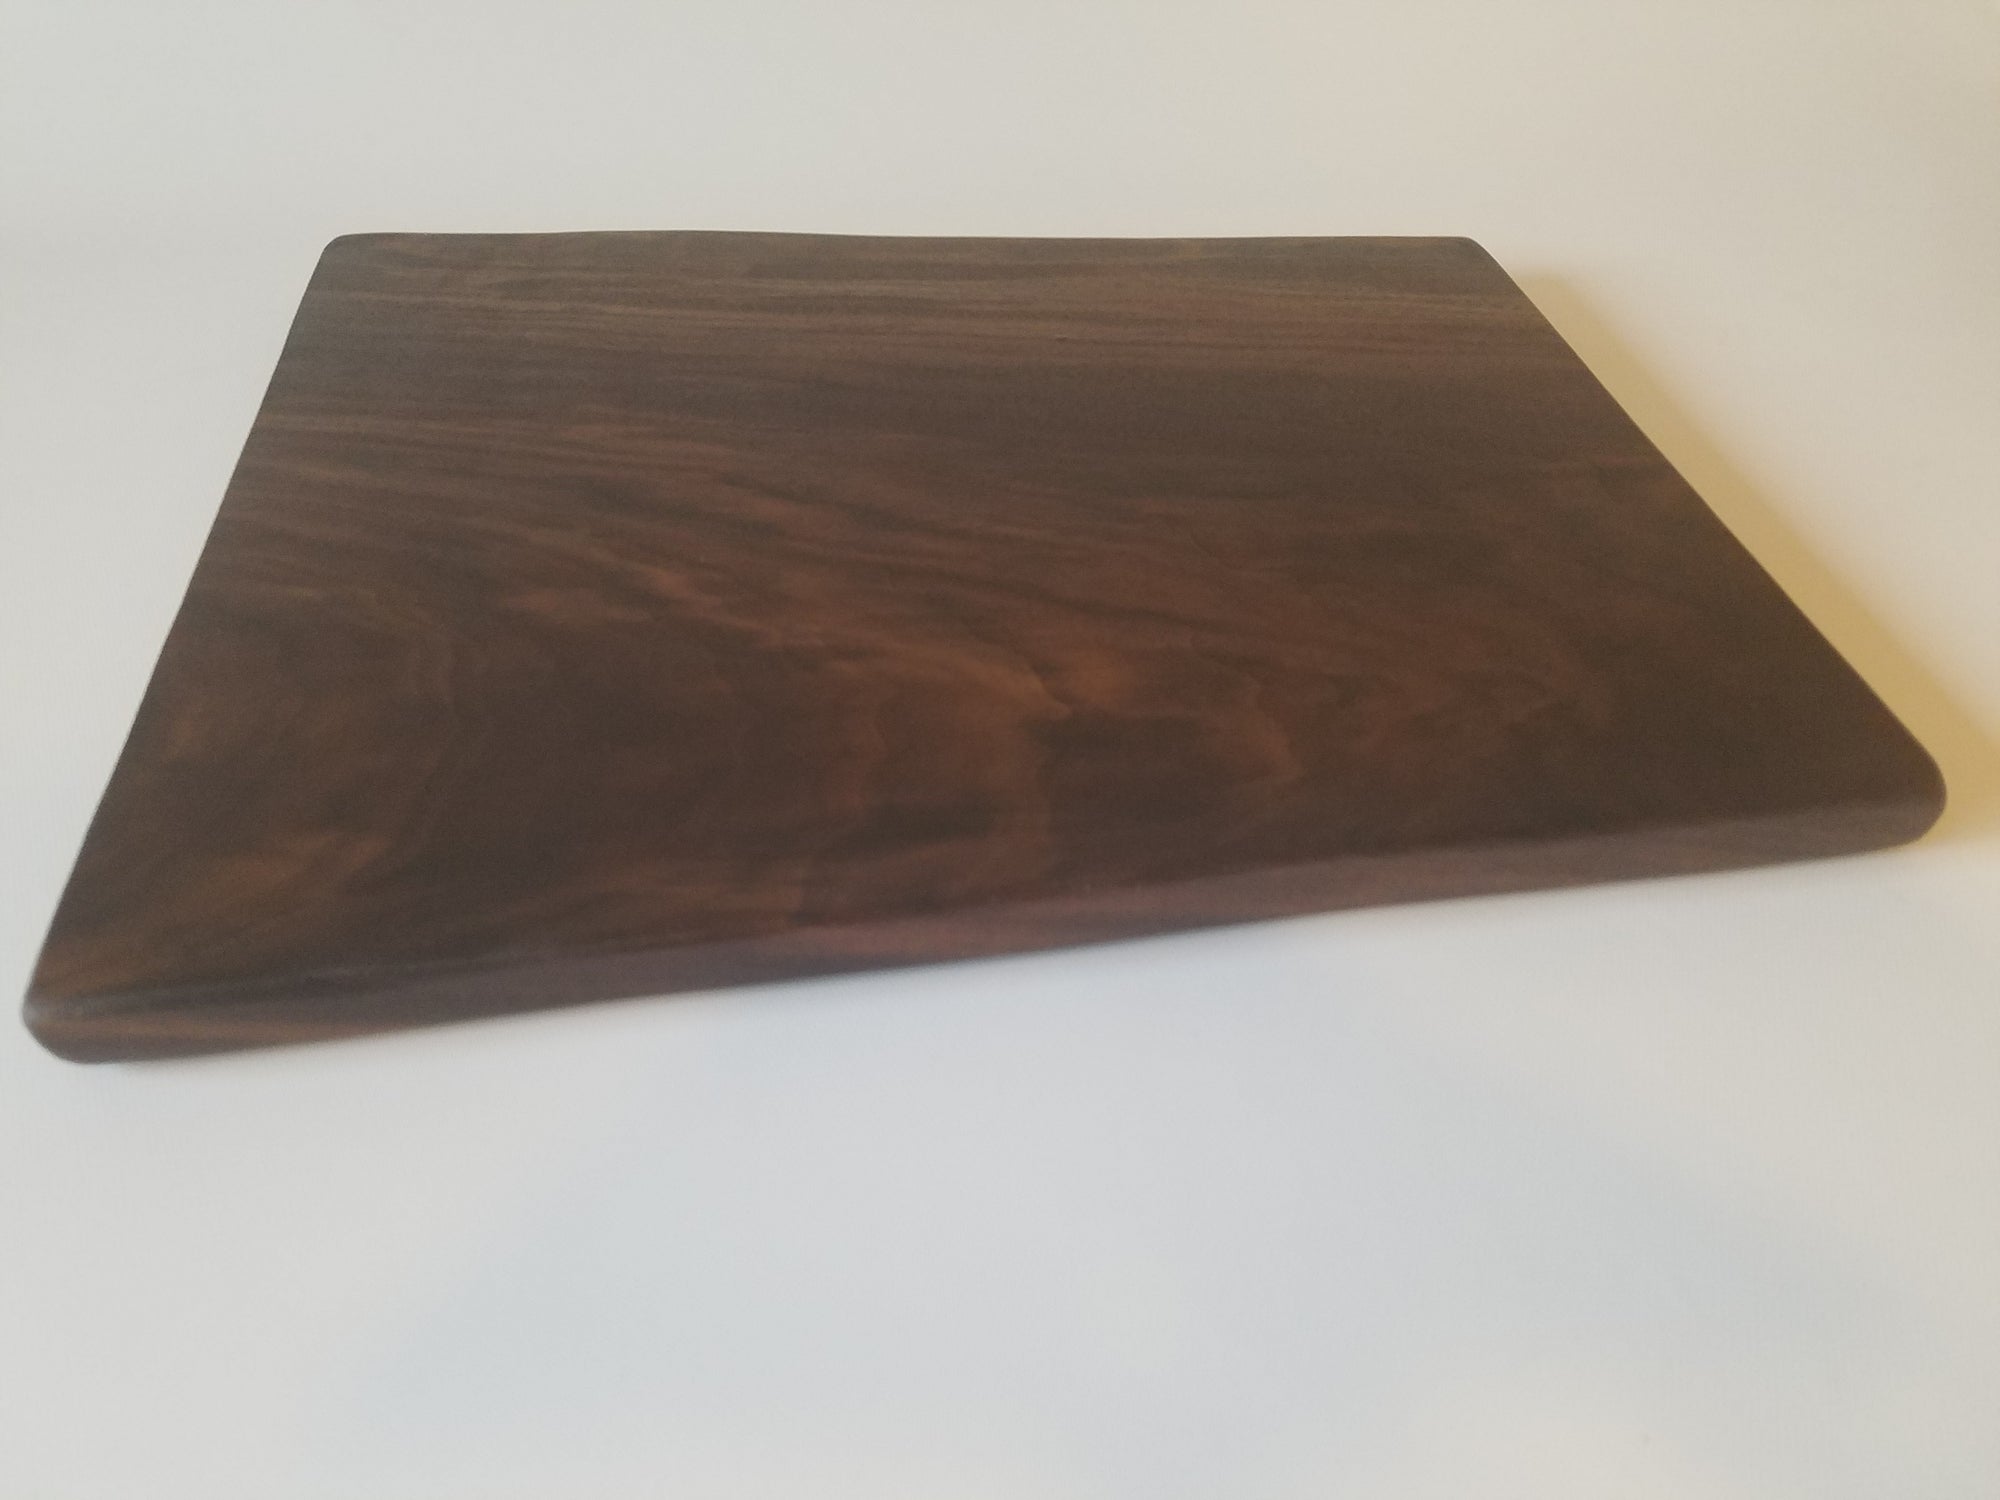 Large Serving Board- Charcuterie Board- Food Server- Black Walnut- Tapas- Bread Board- Cutting Board- Gift For Chef- Cooking- Hosting Gift